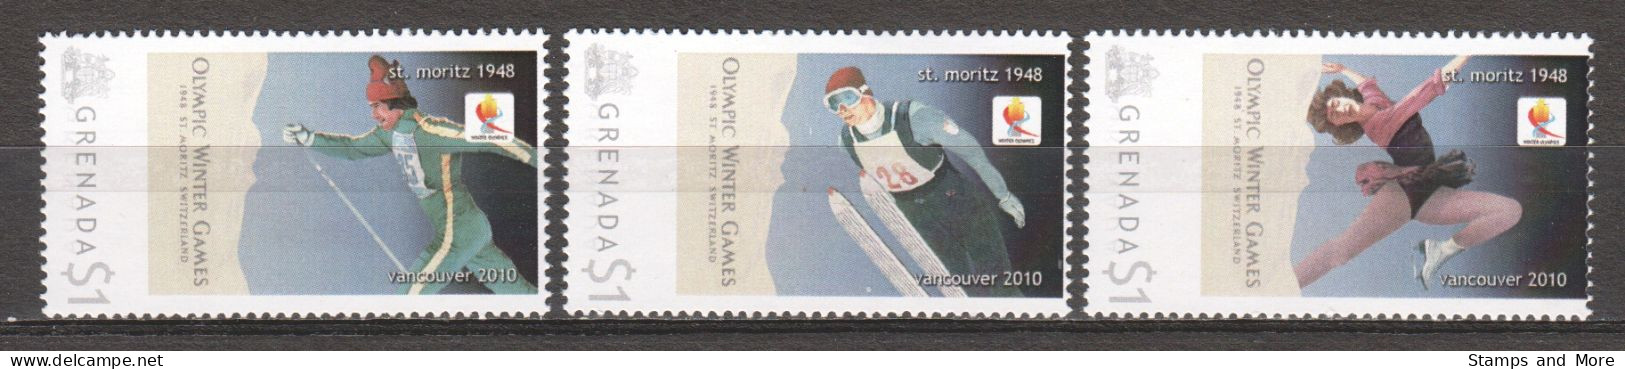 Grenada - Limited Edition Serie 05 MNH - WINTER OLYMPICS VANCOUVER 2010 - ST MORITZ 1948 - Hiver 2010: Vancouver